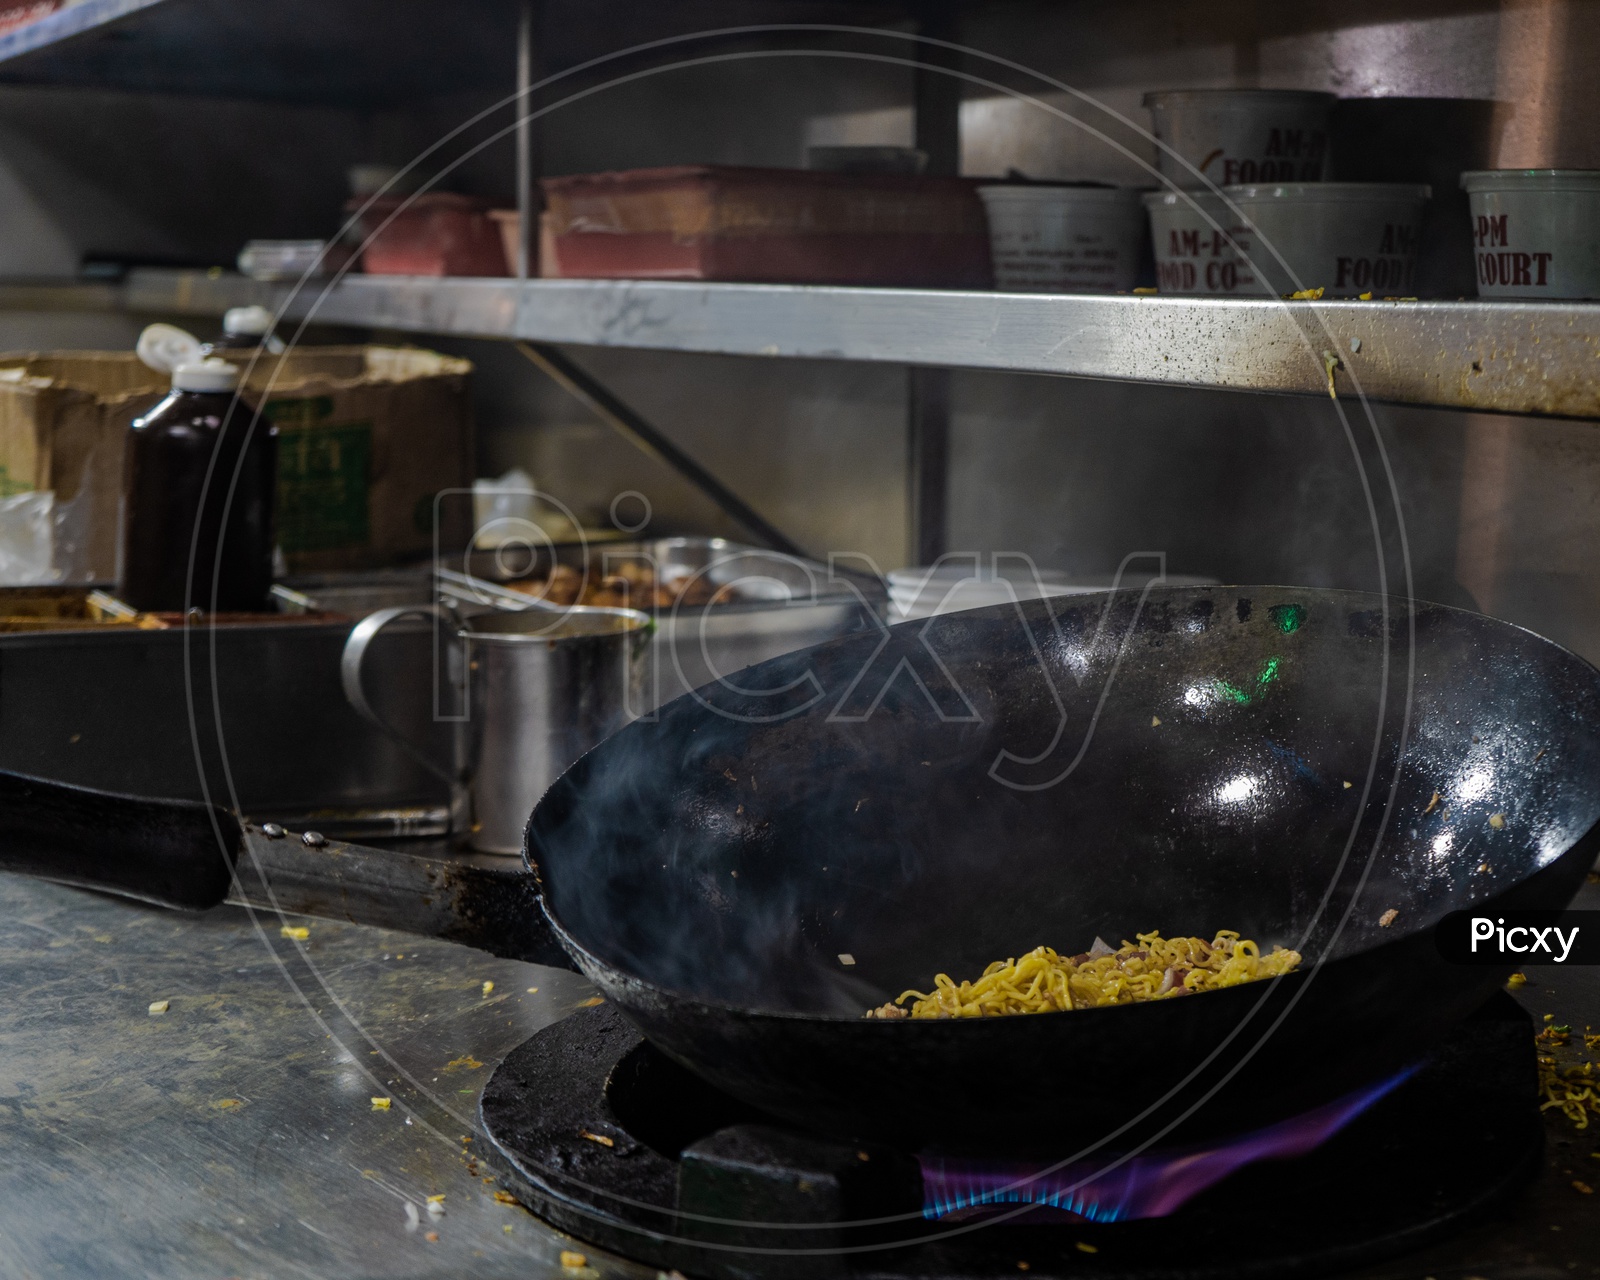 Noodles being cooked in a wok with smoke